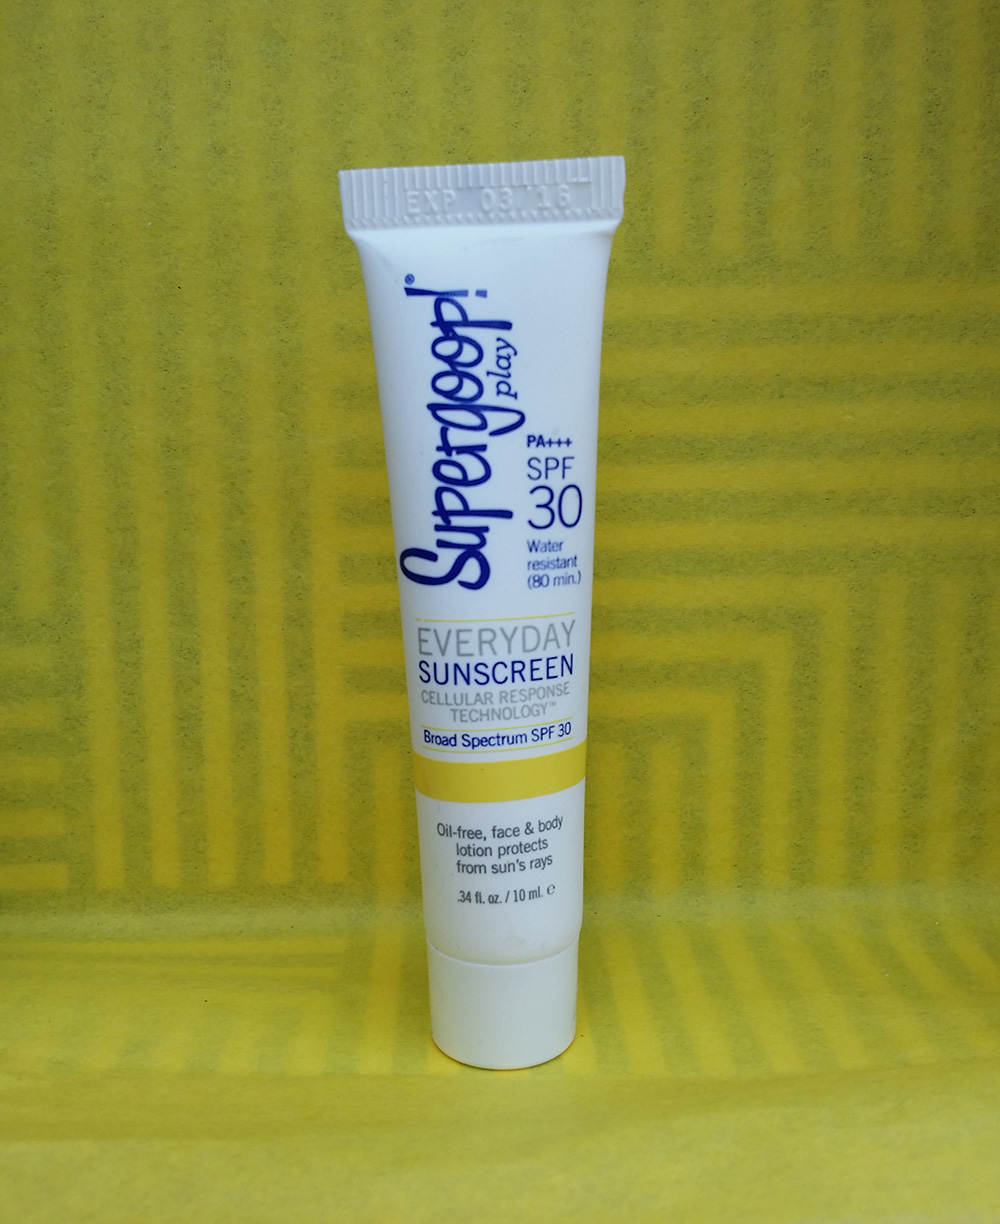 Supergoop!® Everyday SPF 30 with Cellular Response Technology